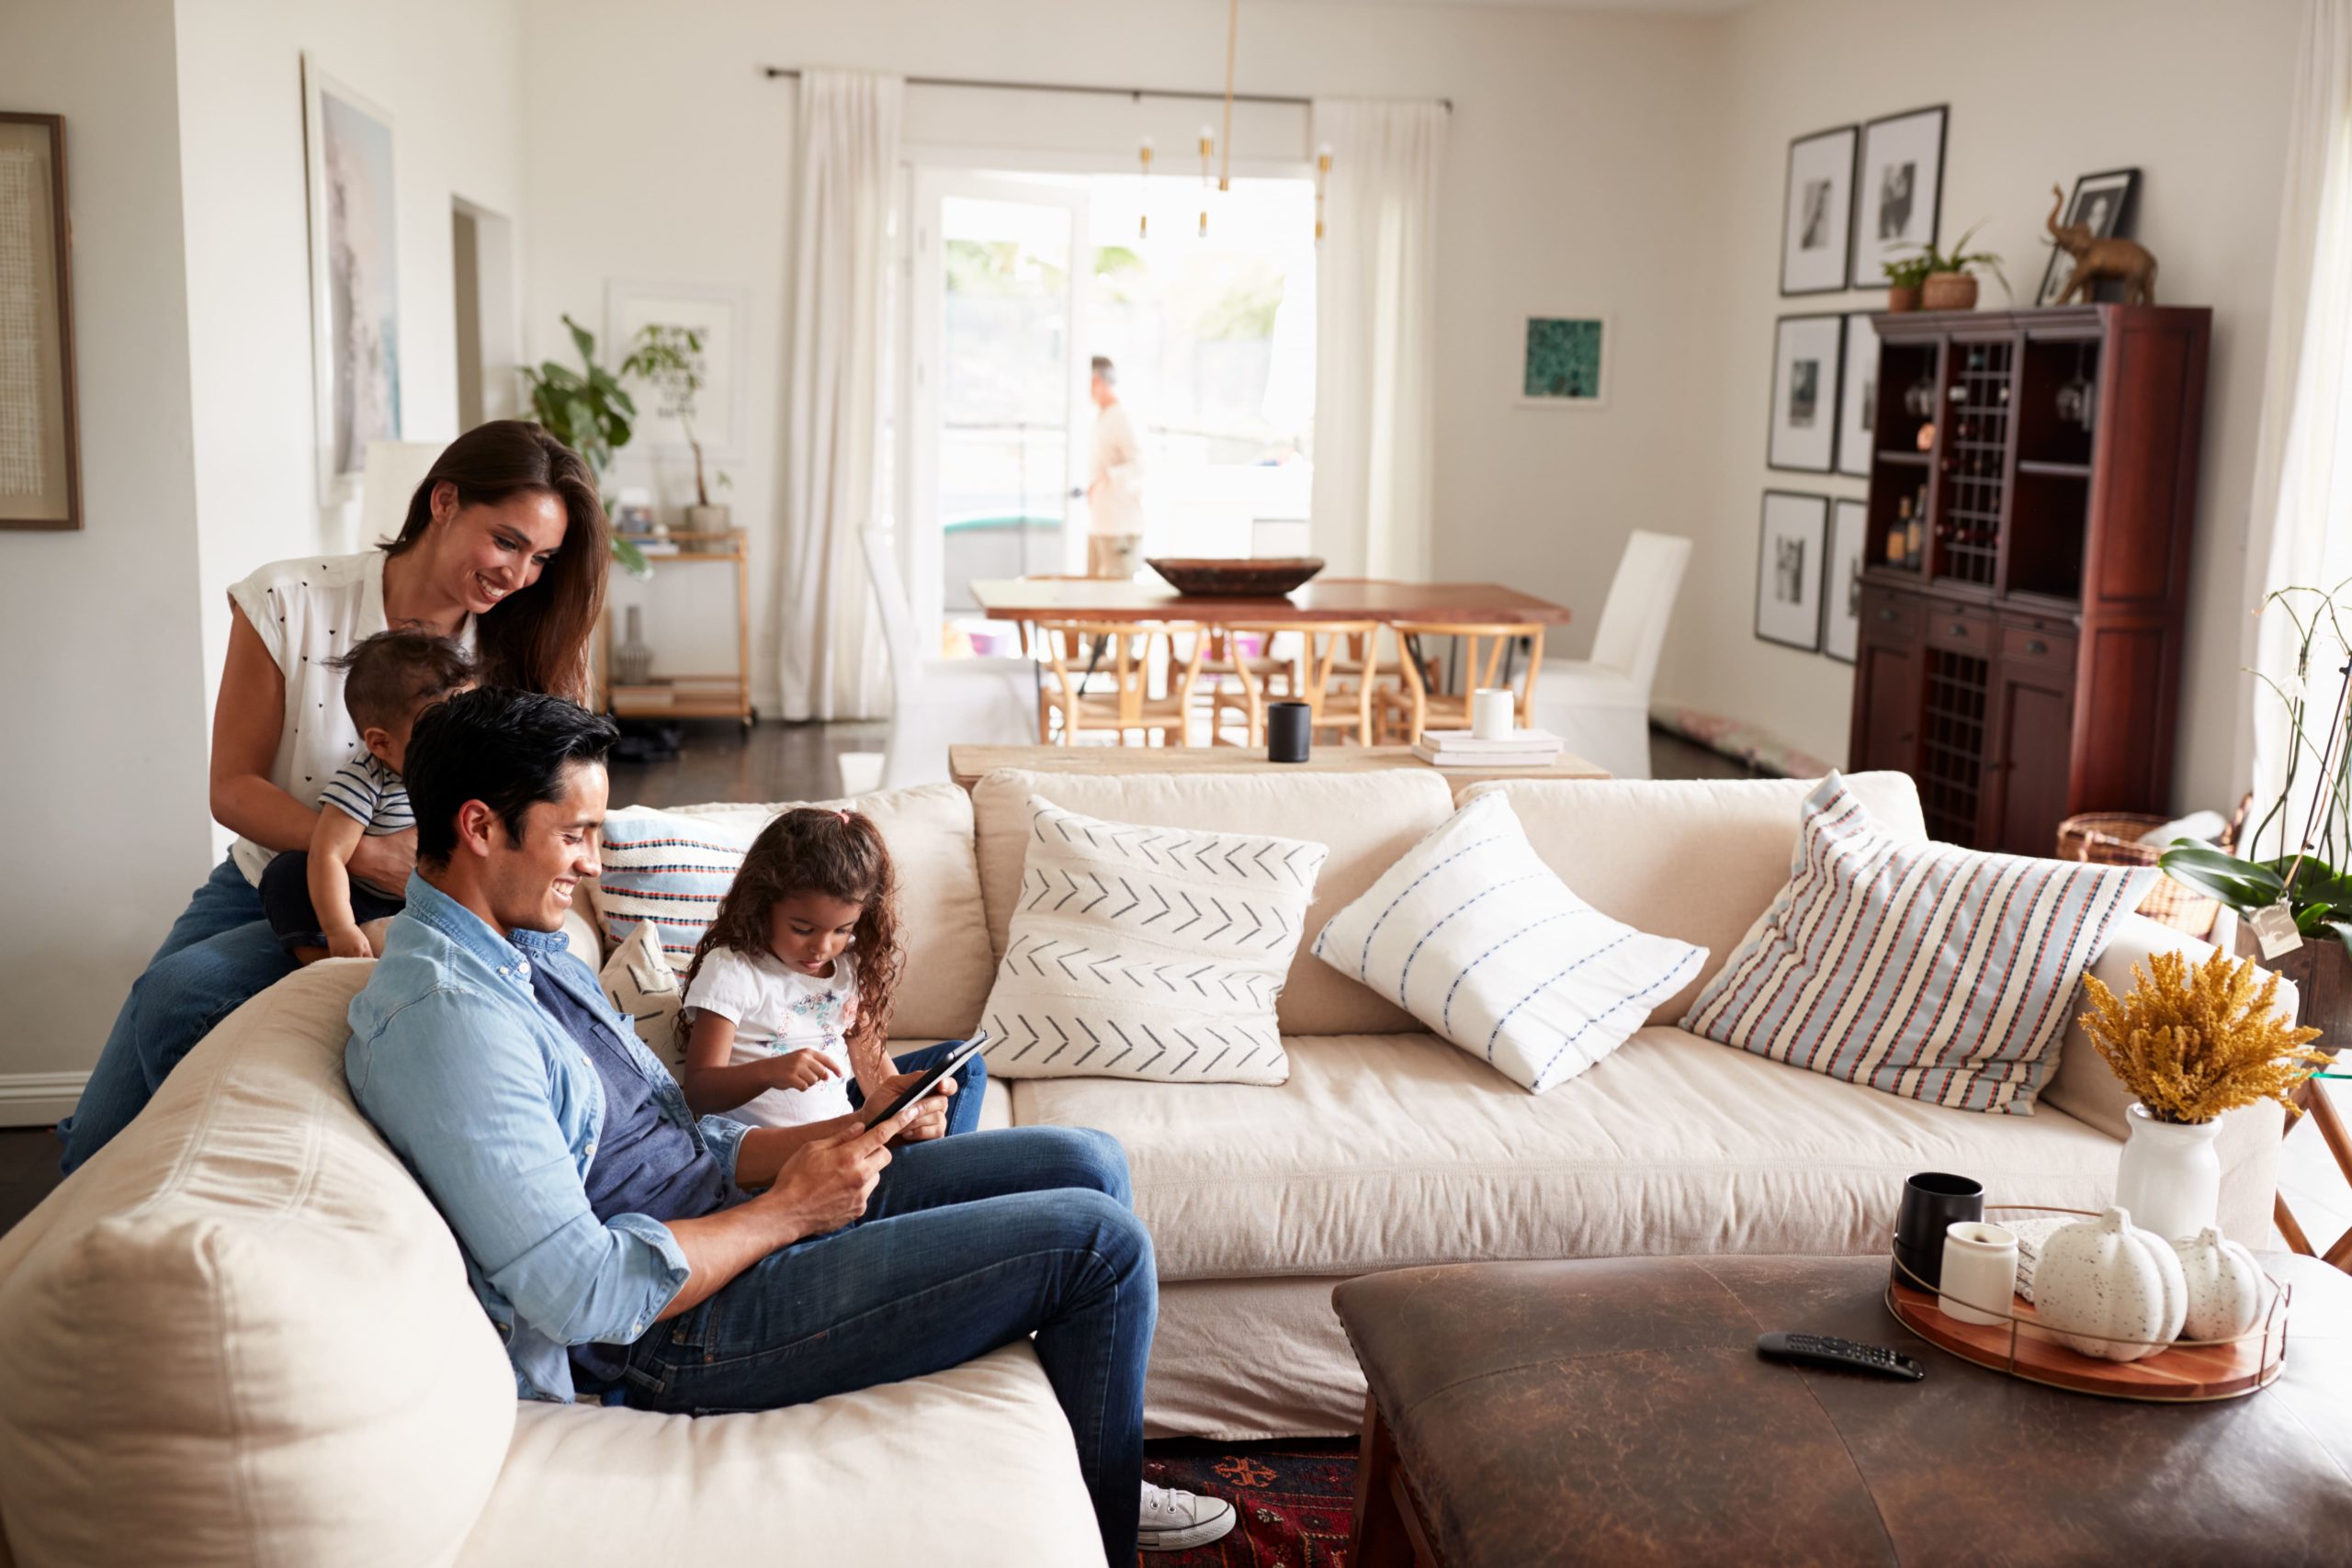 A Happy Family sitting around a white sectional in a cozy white dining room looking at an iPad, possibly searching for Homes for Rent in Santa Rosa, California